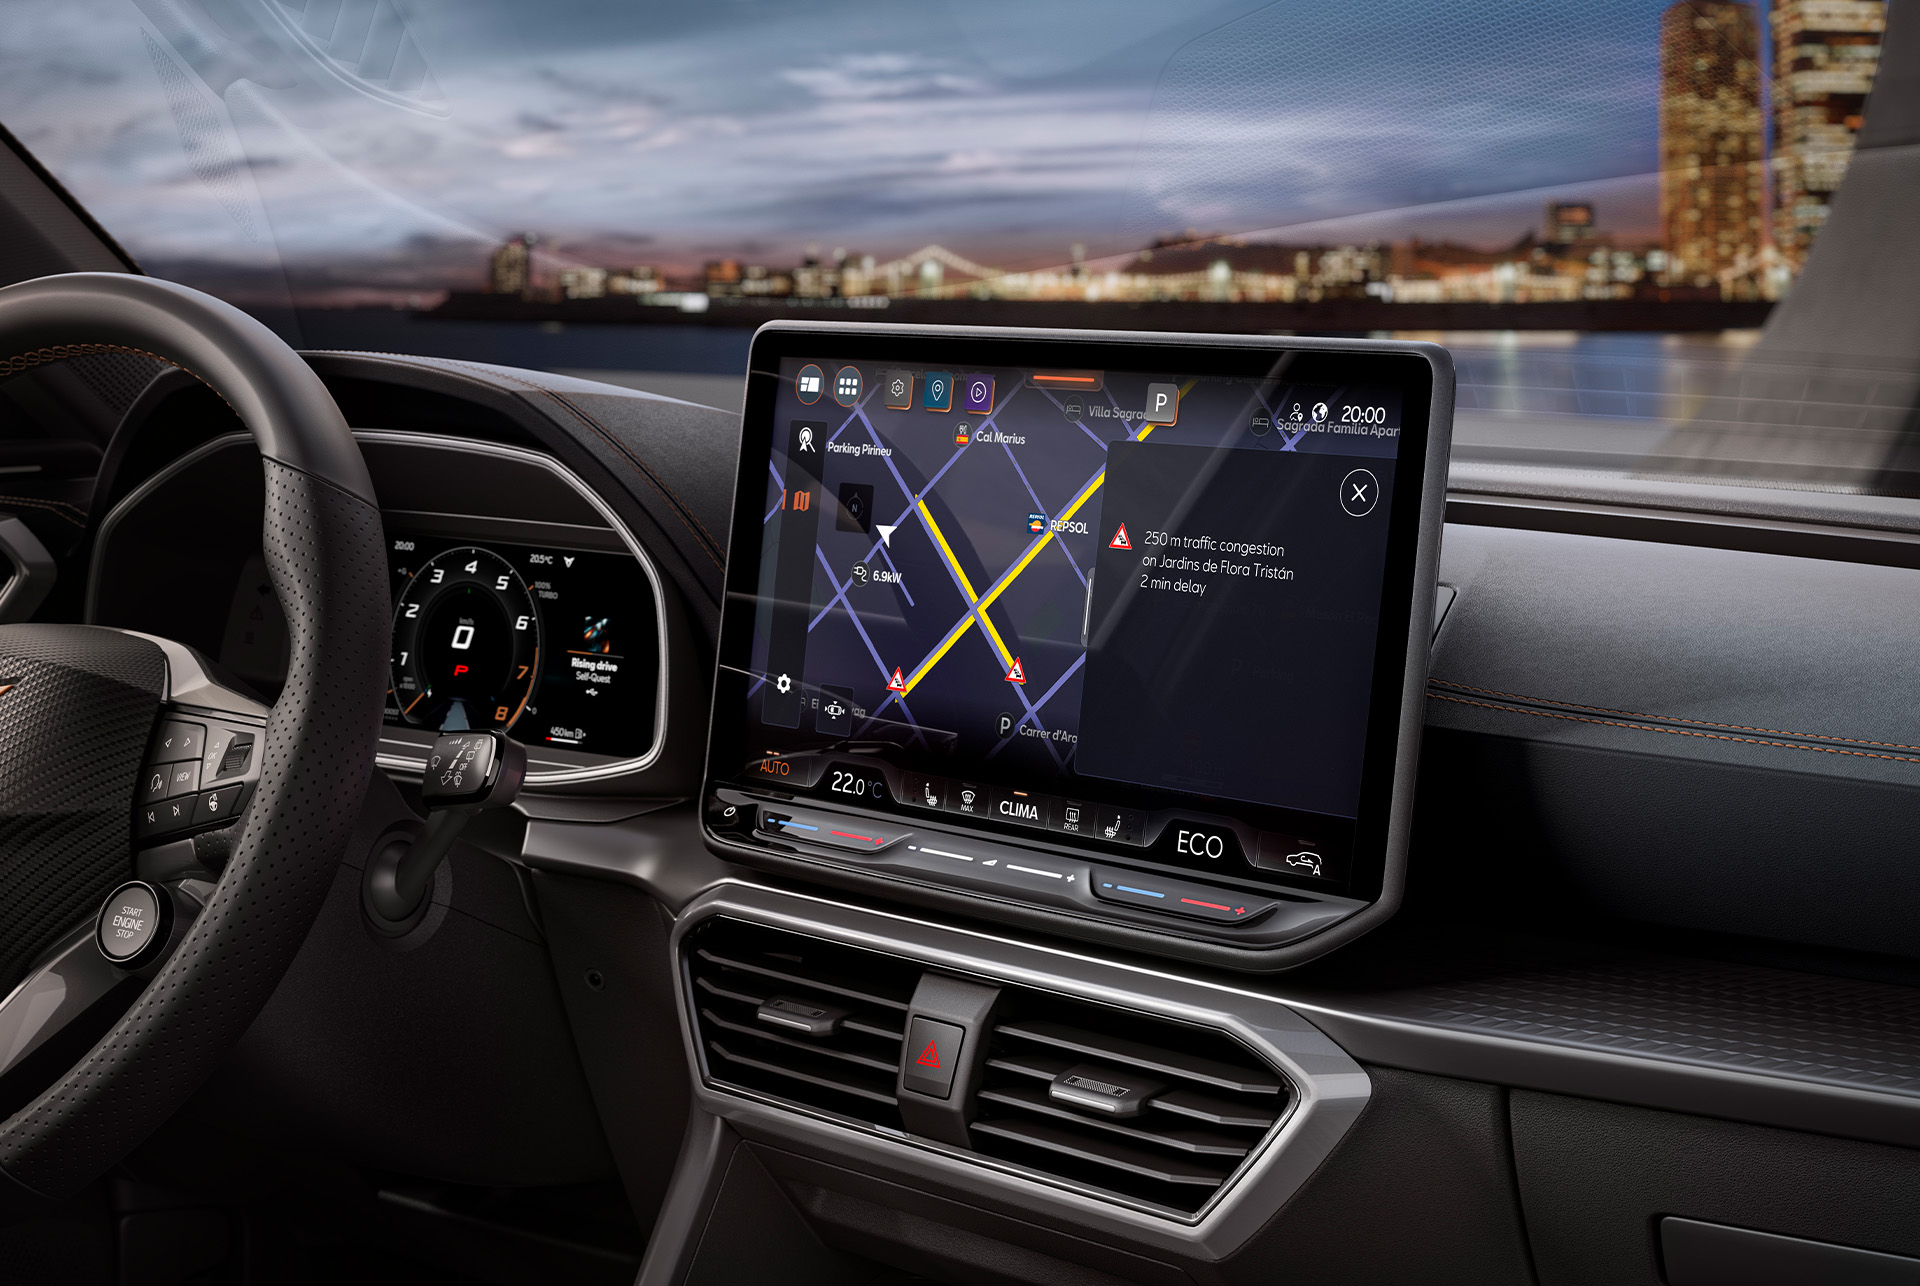 : infotainment screen, wheel, dashboard and air vents of new cupra leon 2024 hybrid vehicle.